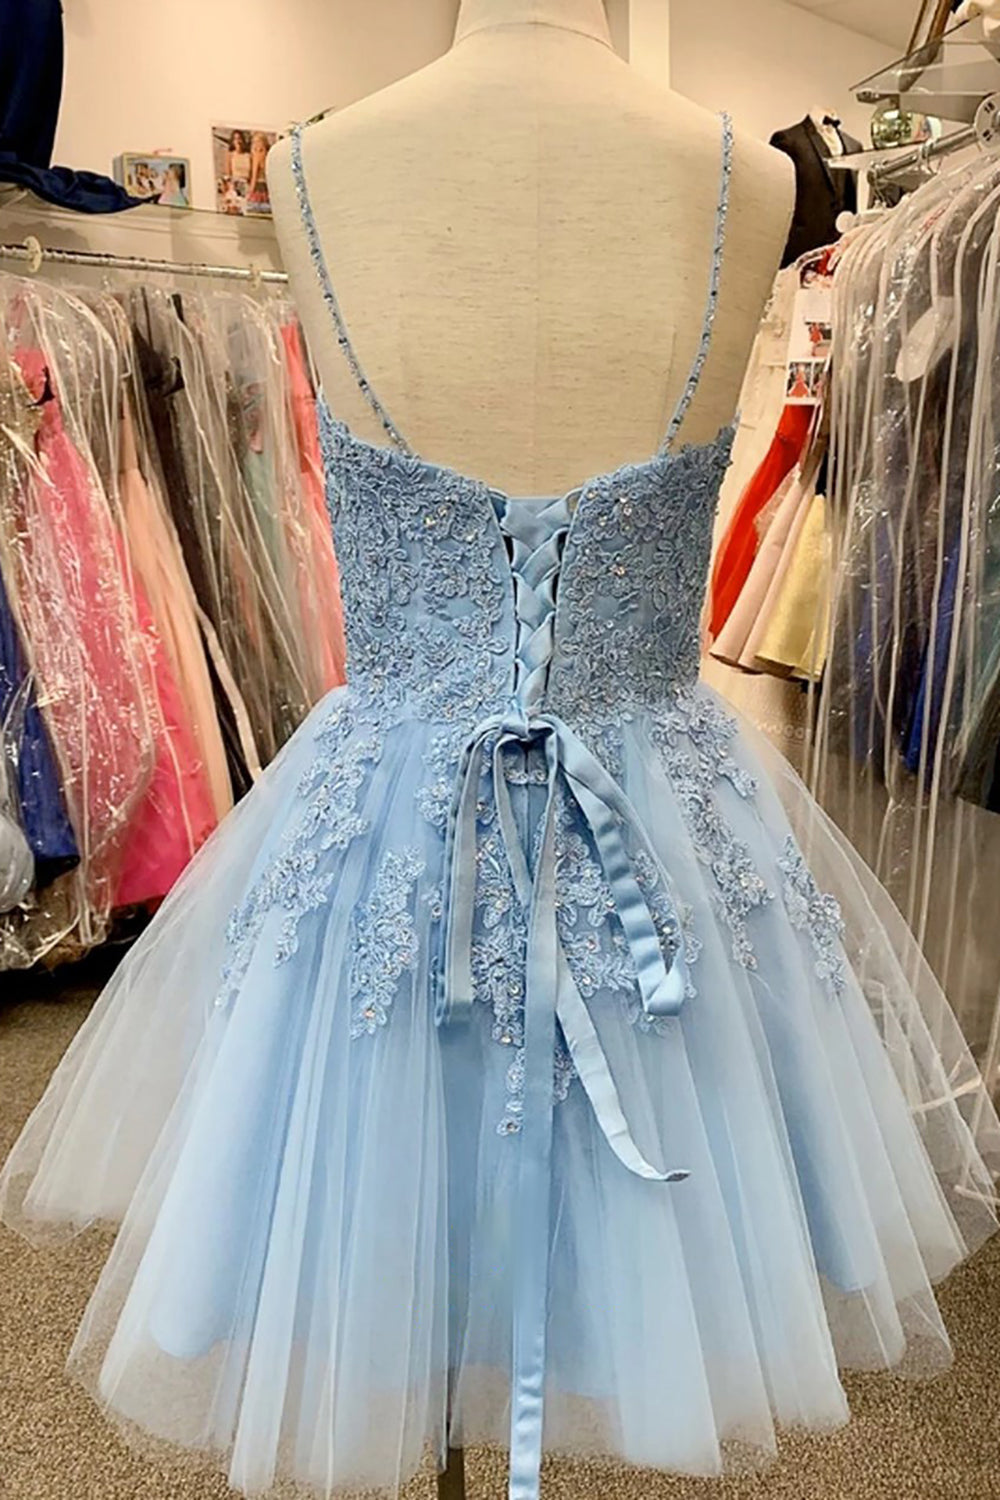 Party Dresses Design, Blue Spaghetti Straps Homecoming Dress With Appliques